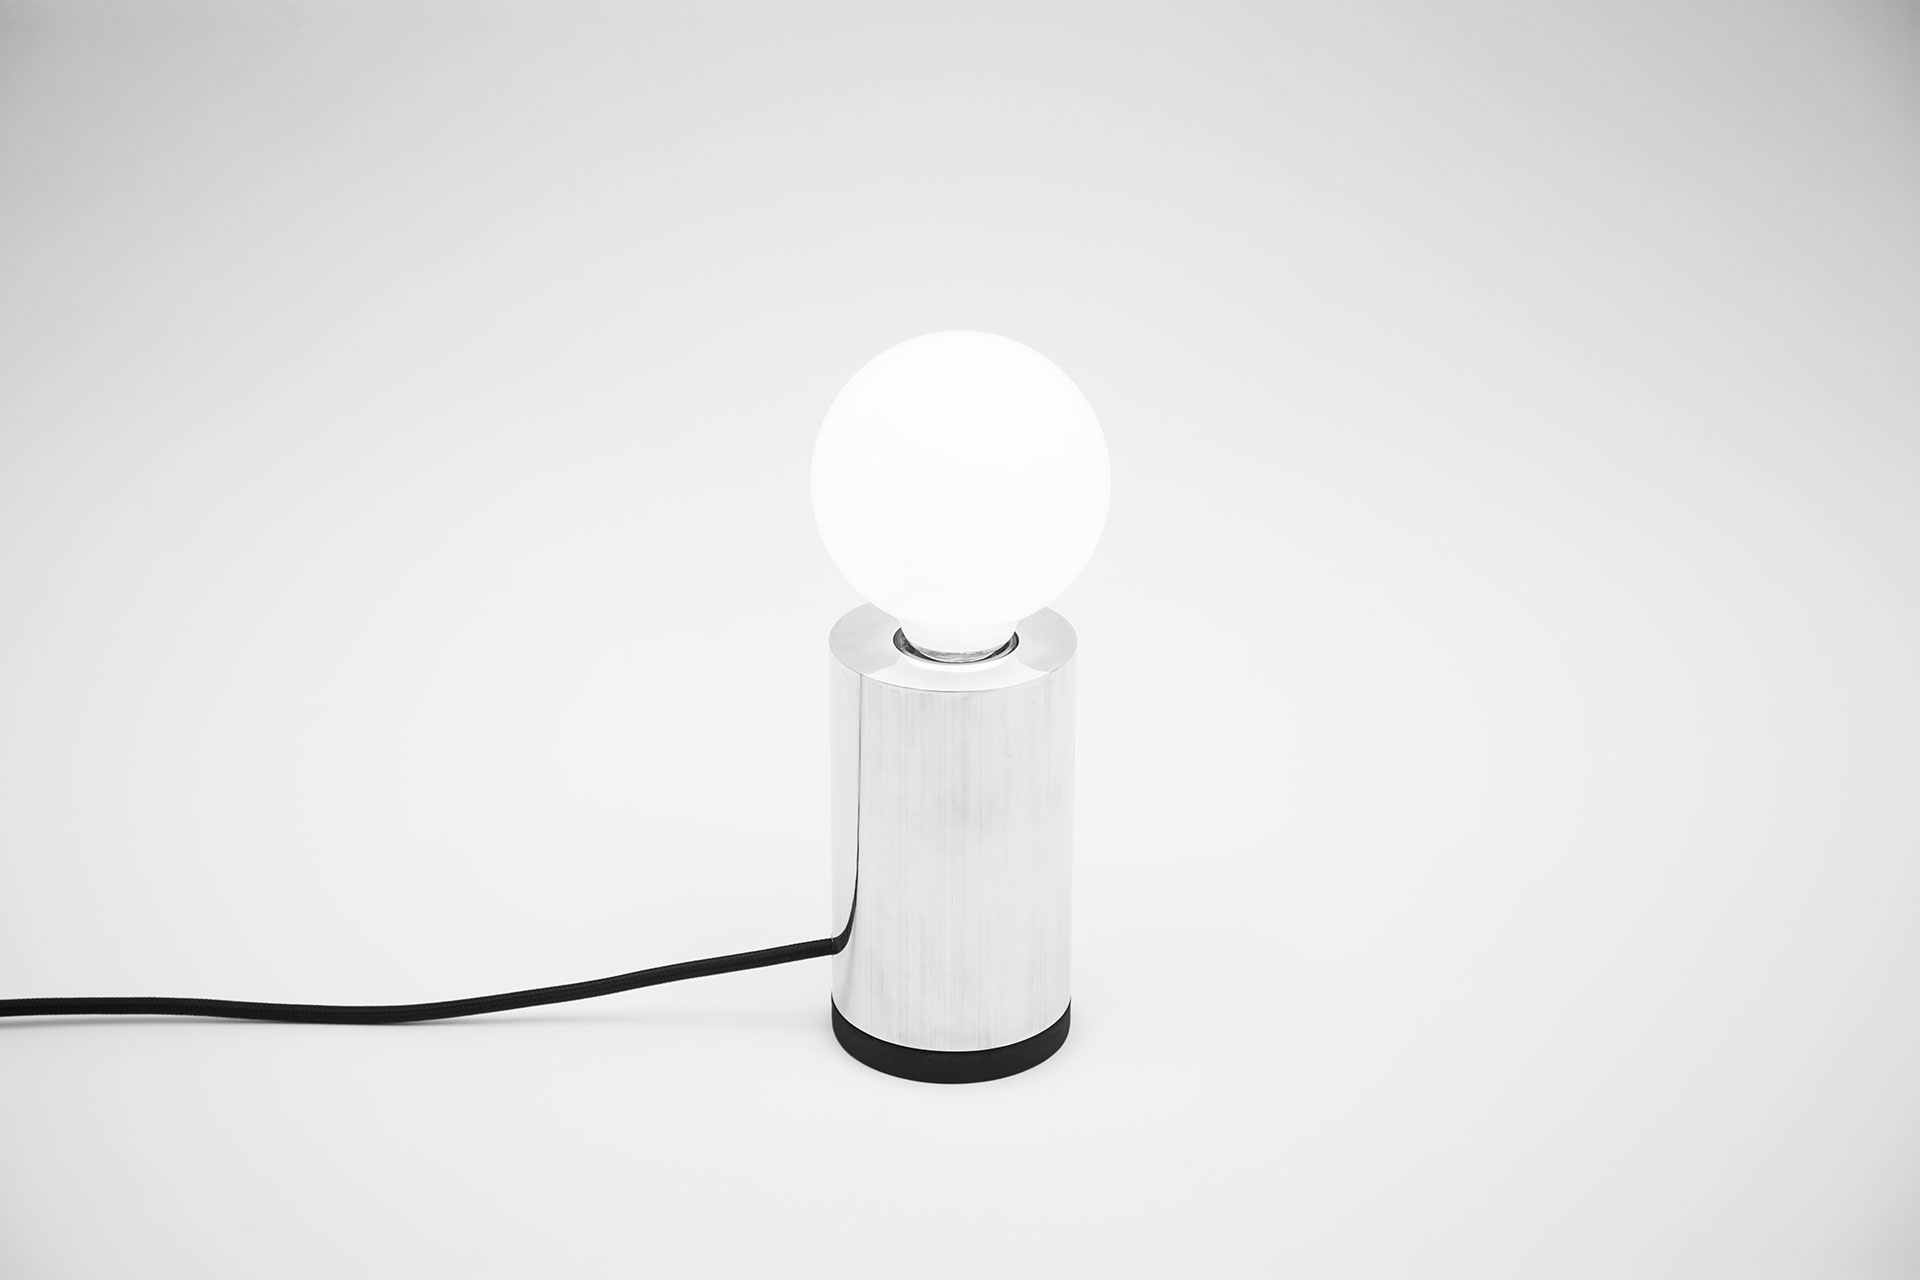 Minimalist desk lamp made of solid aluminum with creative touch dimmer inspired by modern design